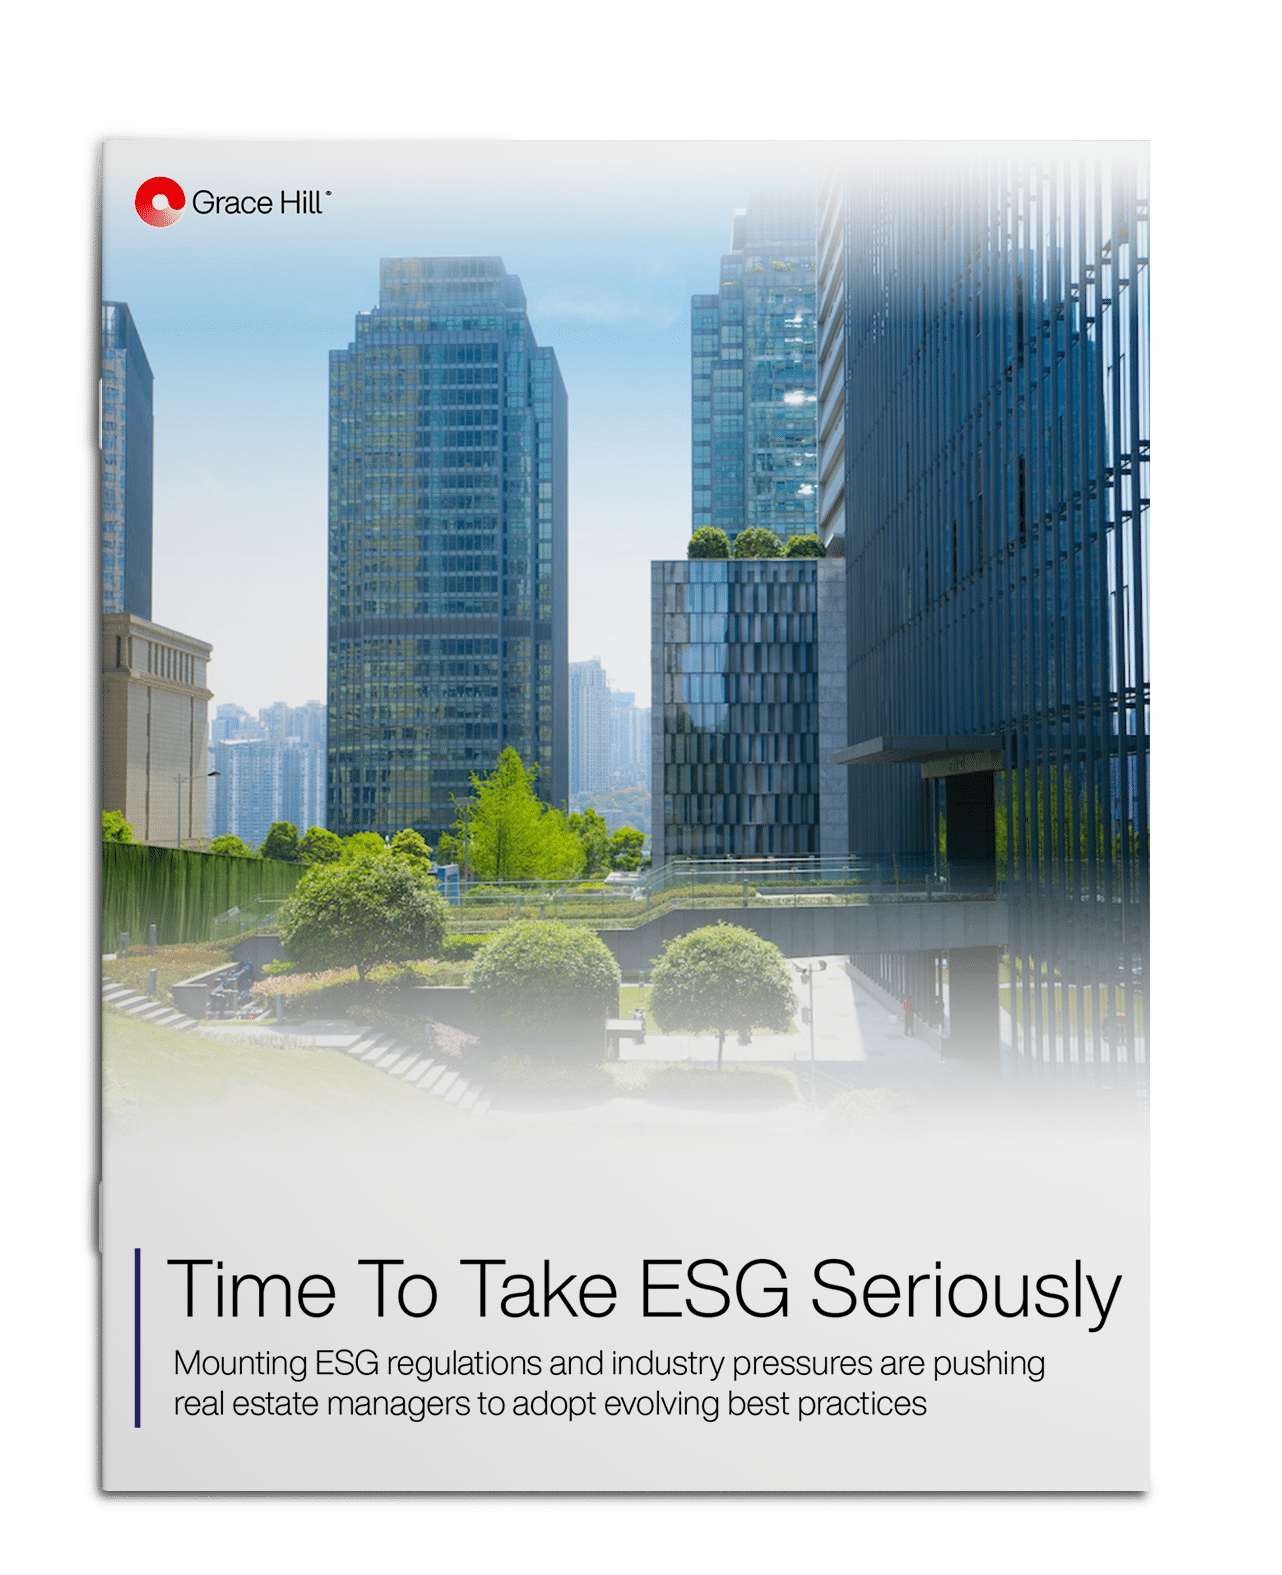 commercial real estate ESG front page city mockup